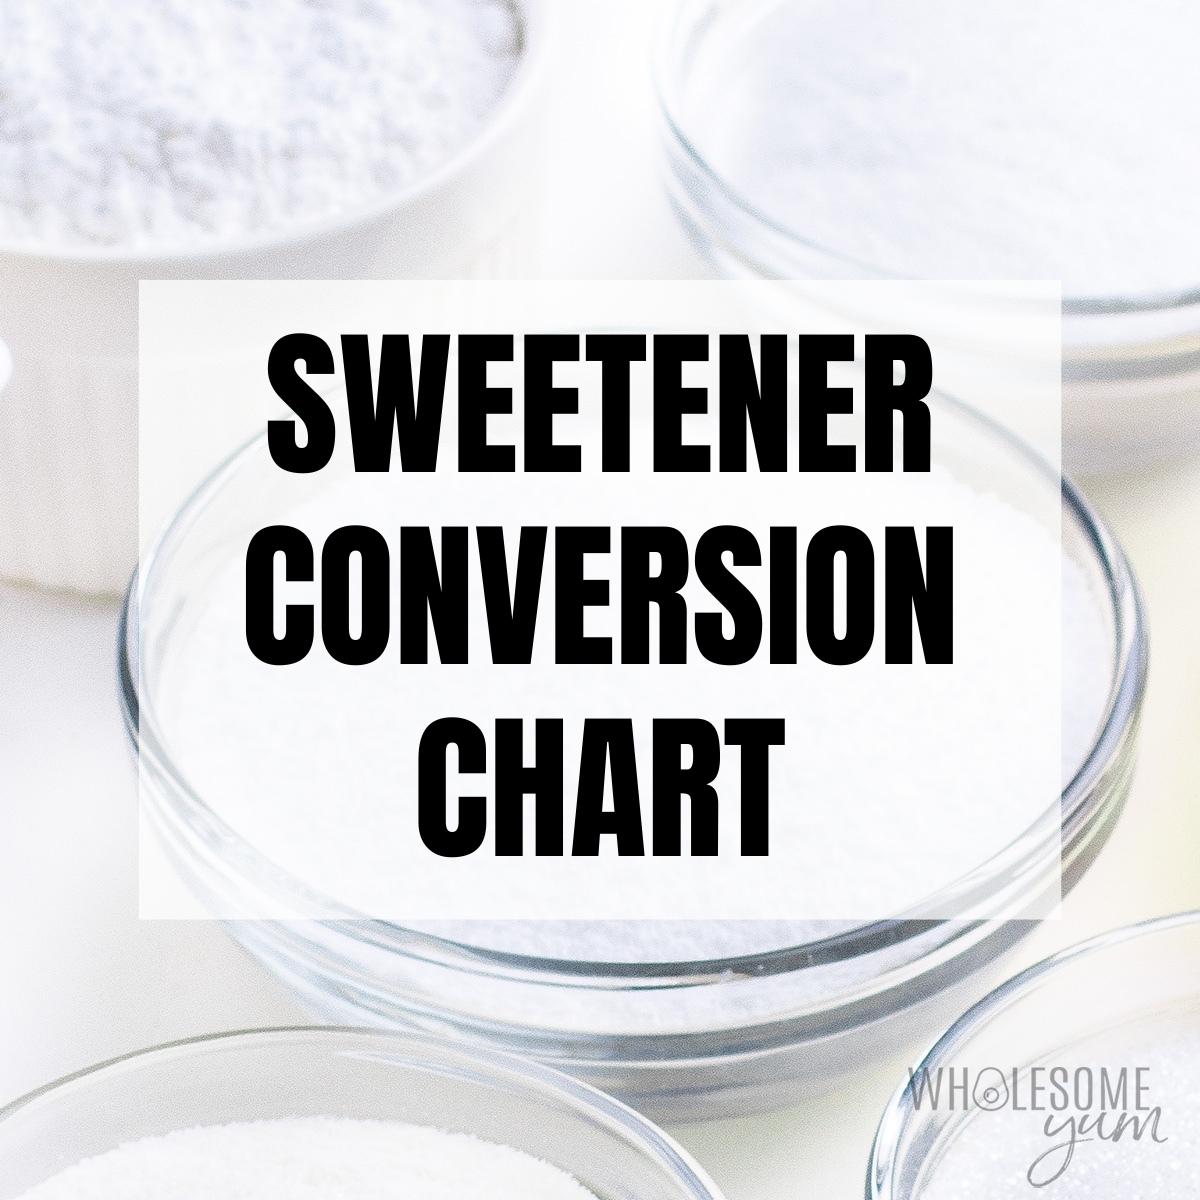 Sweetener conversion chart cover with erythritol, stevia, and monk fruit in bowls.